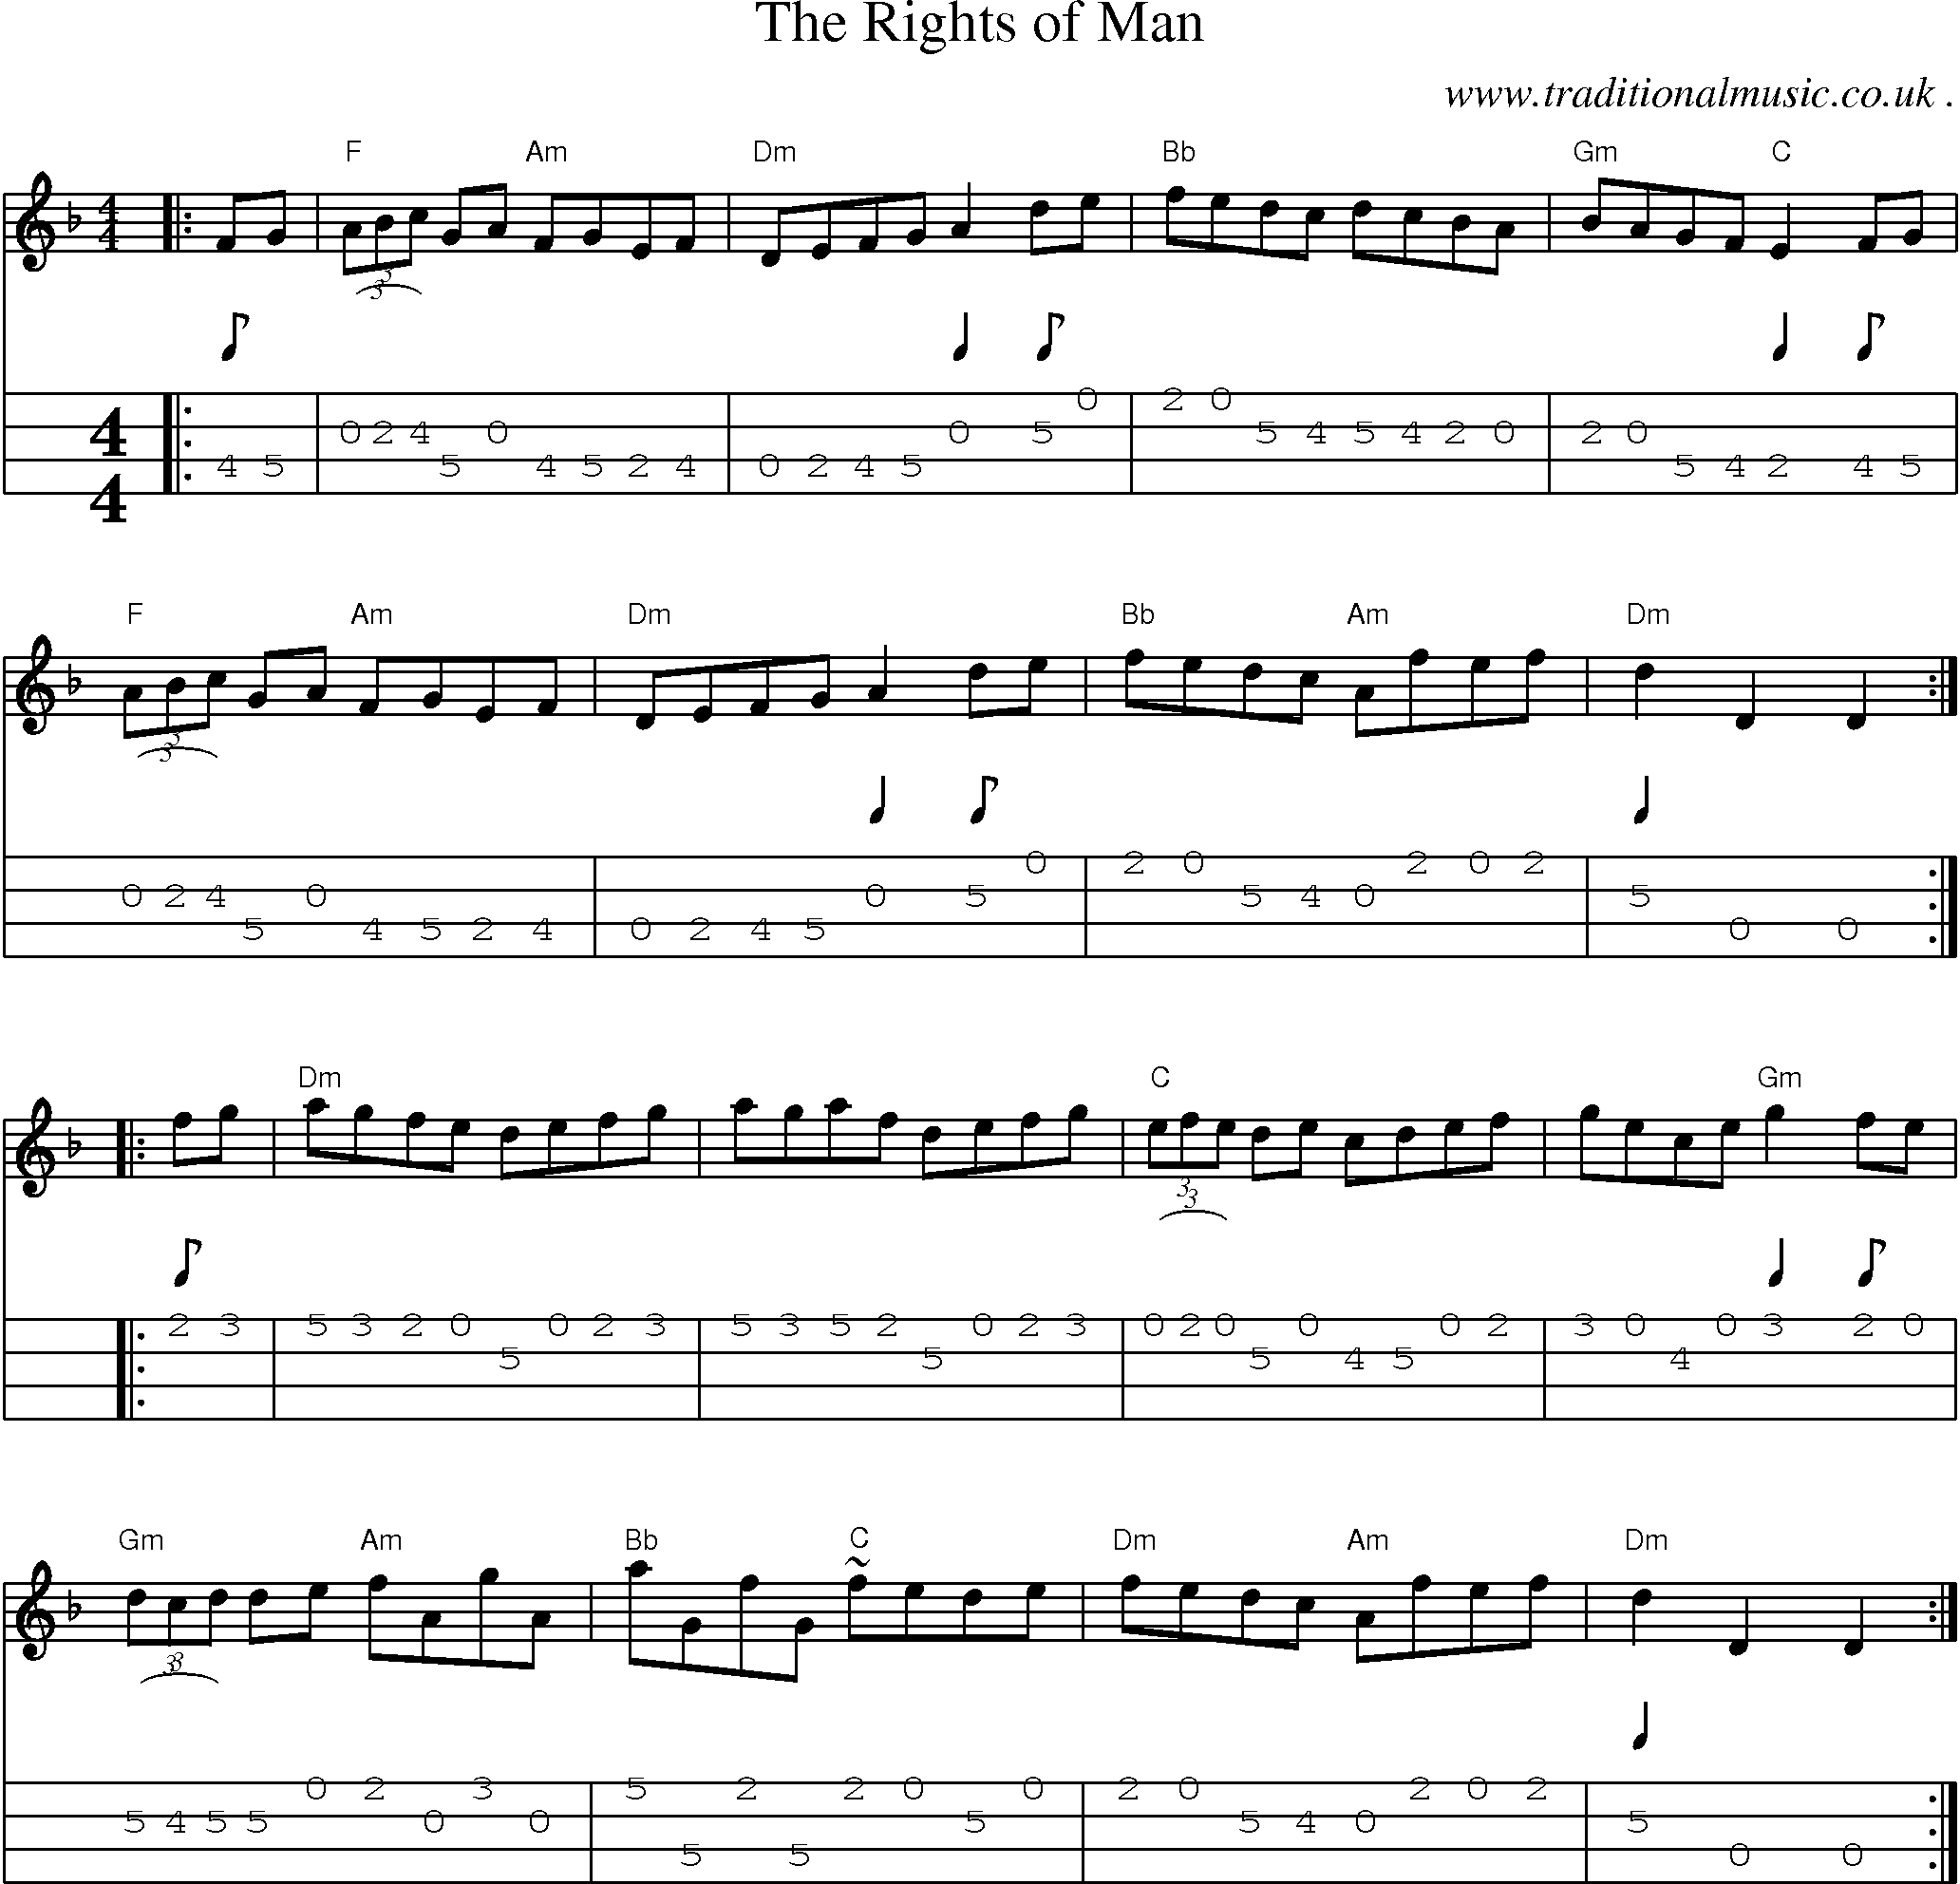 Music Score and Guitar Tabs for The Rights Of Man